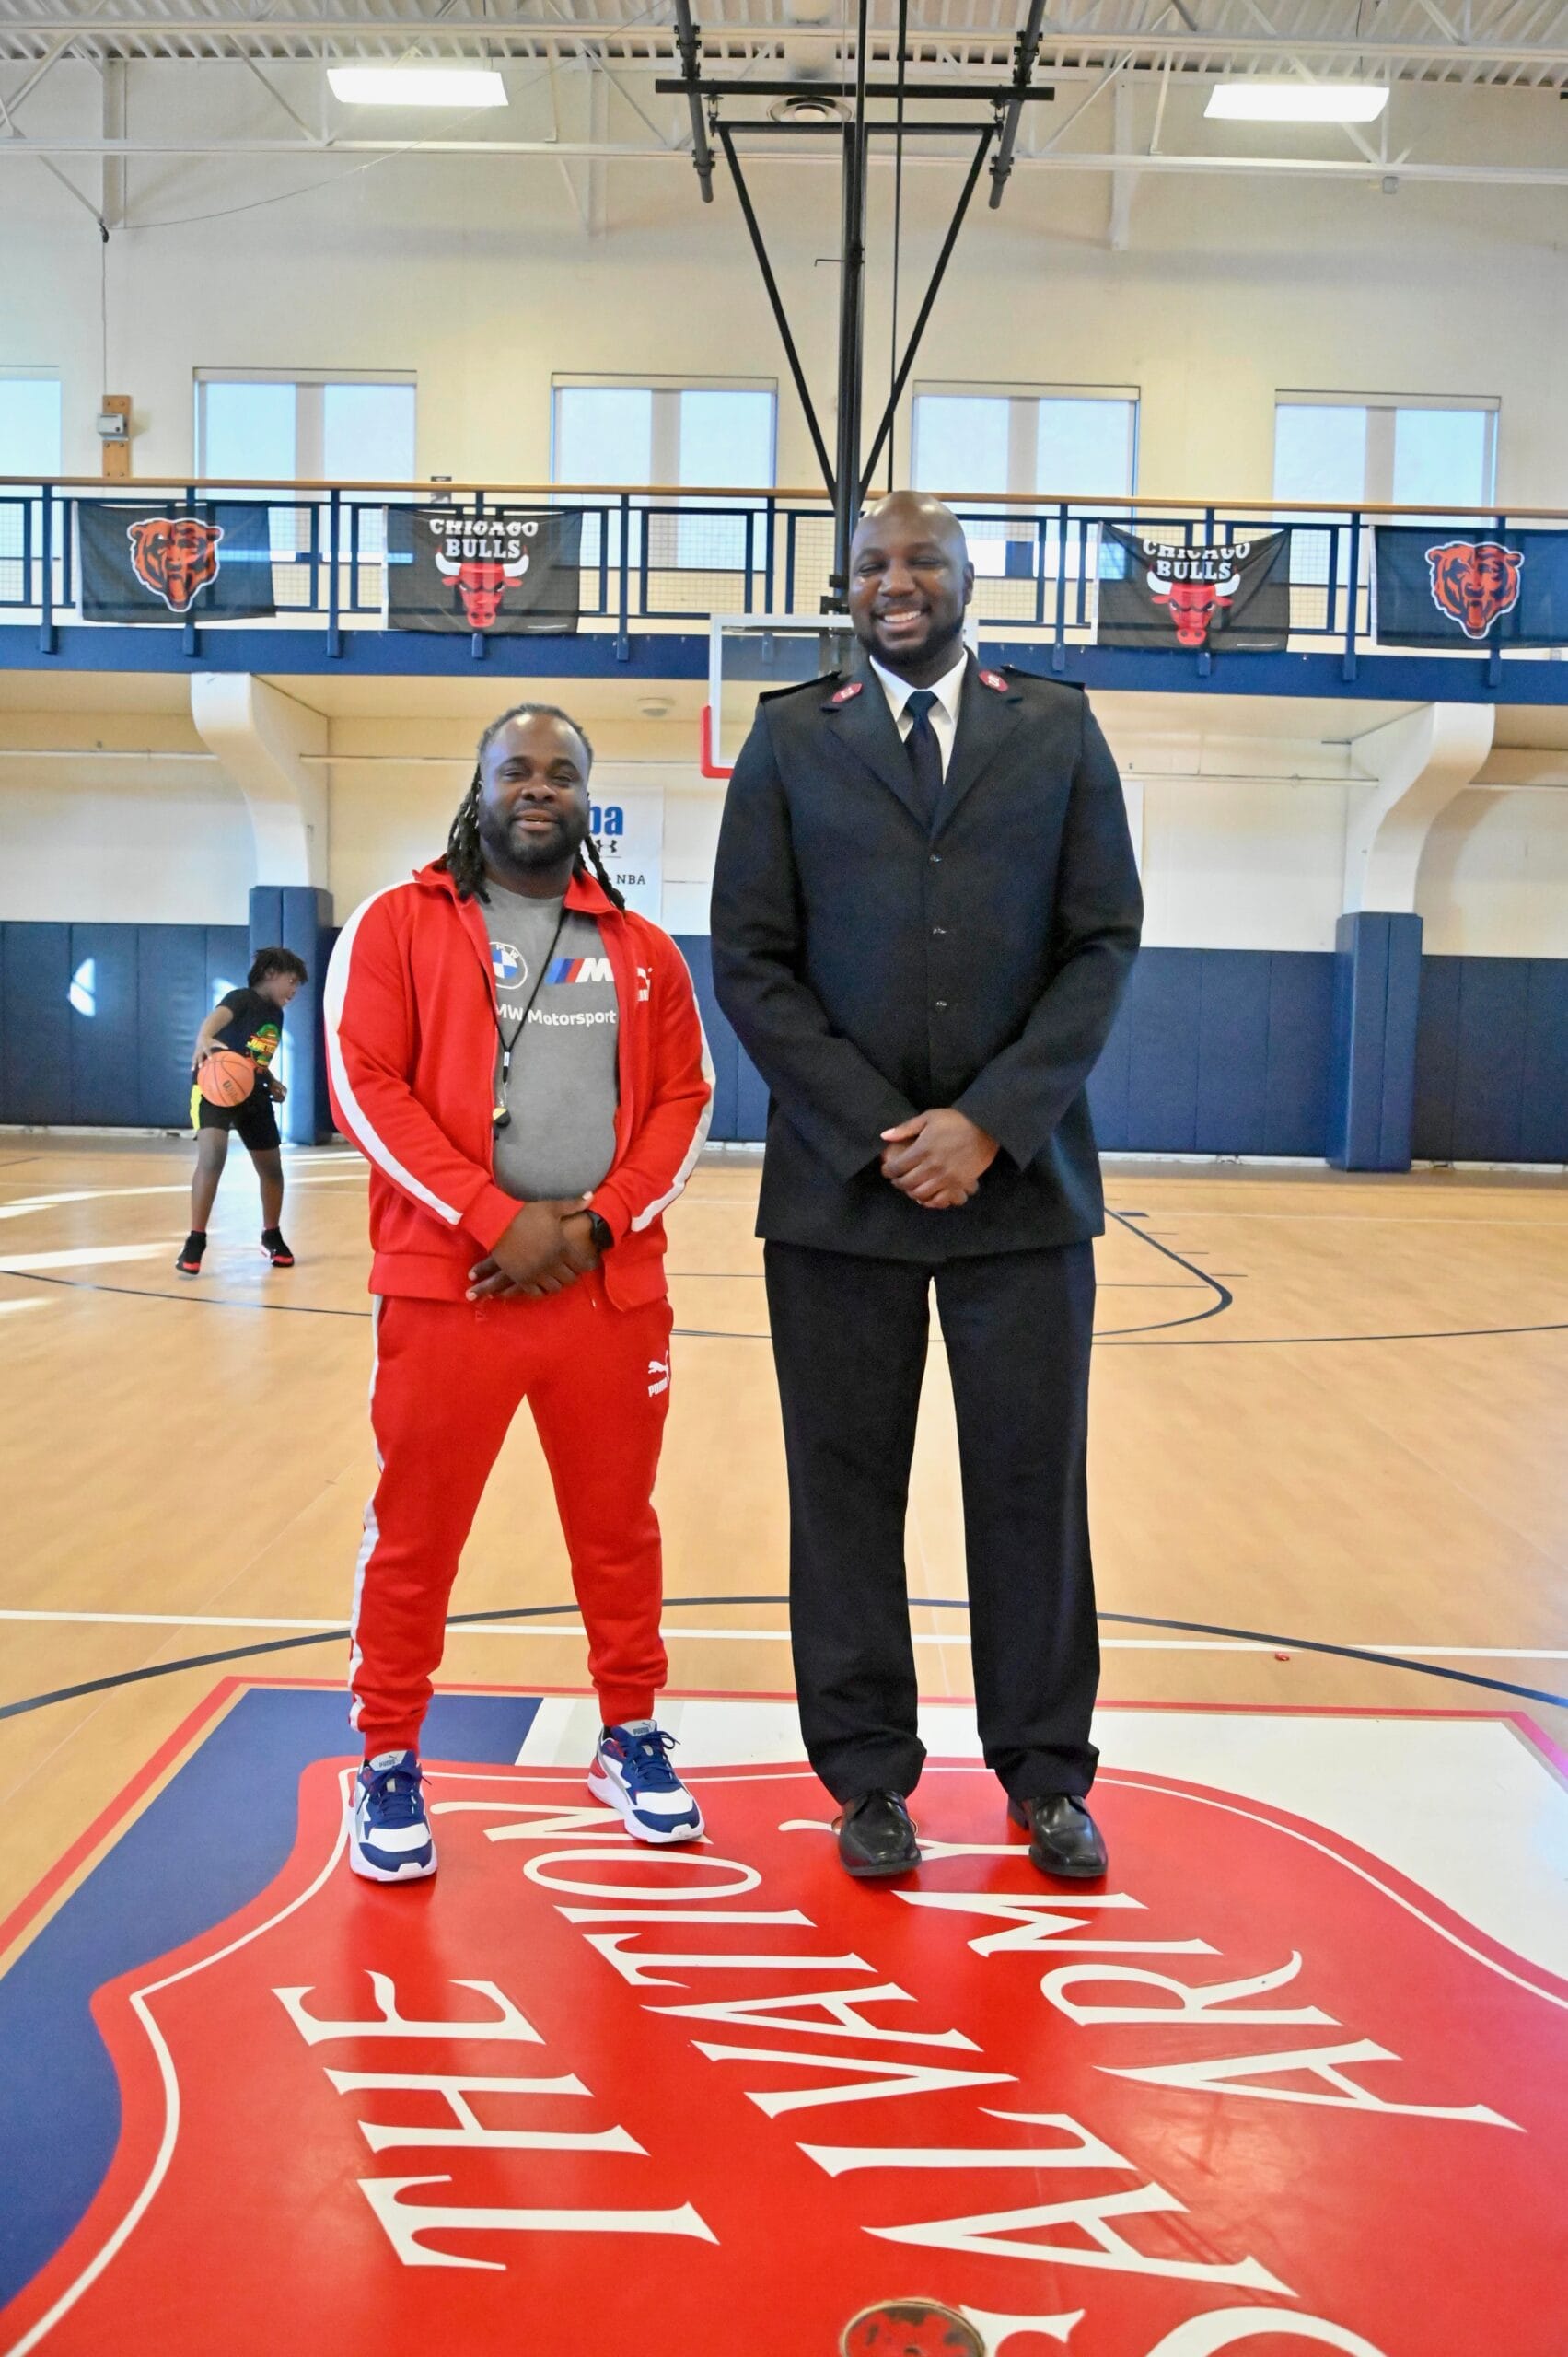 Englewood’s Salvation Army hosted President’s Day basketball tournament